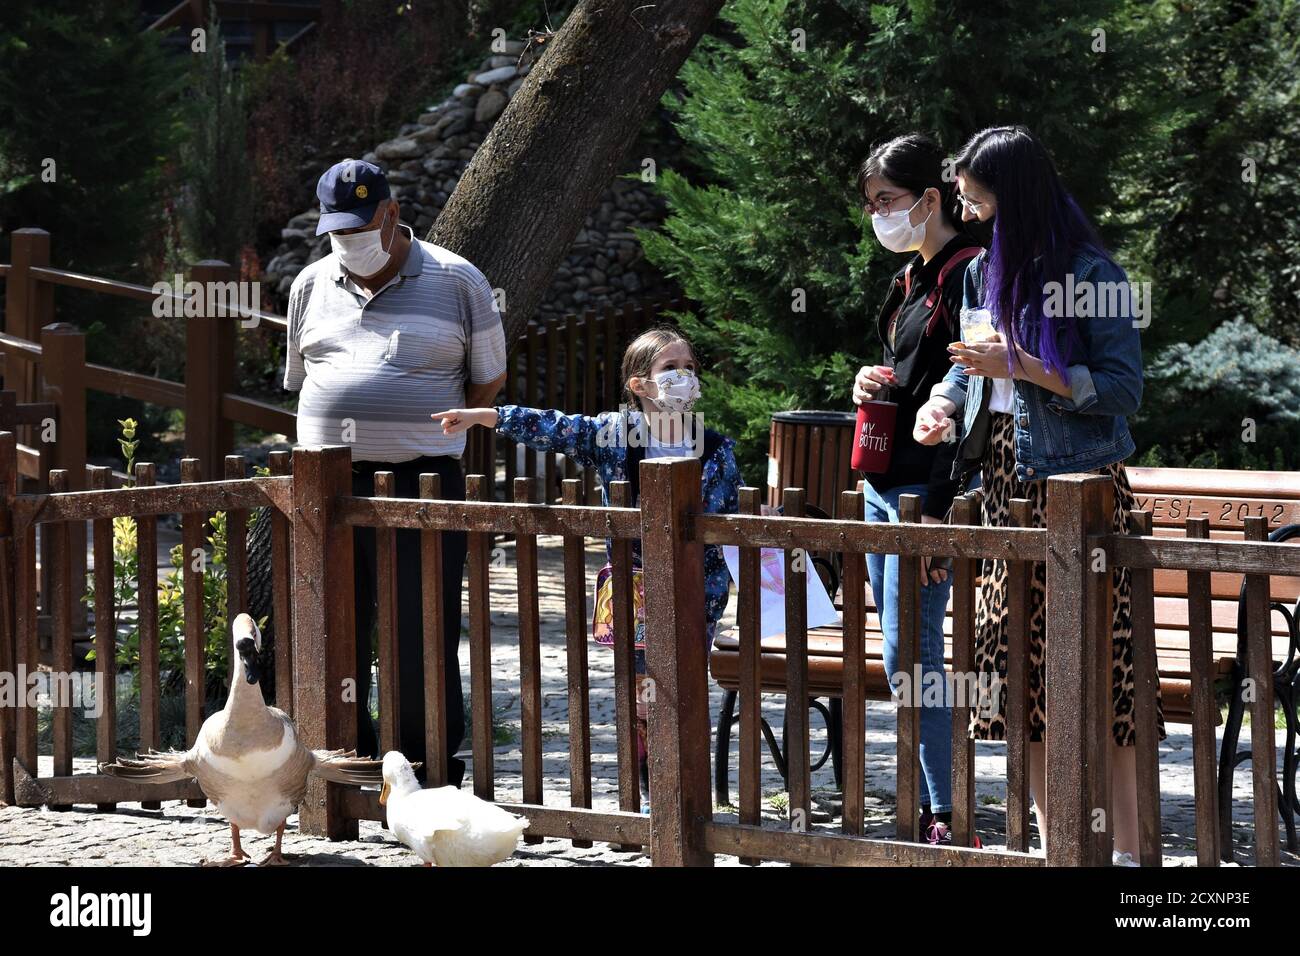 Ankara, Turkey. 1st Oct, 2020. People wearing protective face masks enjoy a nice weather in Kugulu Park amid the coronavirus (COVID-19) outbreak. Turkish Minister of Health Fahrettin Koca admitted on September 30 that asymptomatic cases of the coronavirus are deliberately excluded from daily reports. The minister's statement came after the revelation of a document showing nearly 20 times more cases than the official daily figures. Credit: Altan Gocher/ZUMA Wire/Alamy Live News Stock Photo